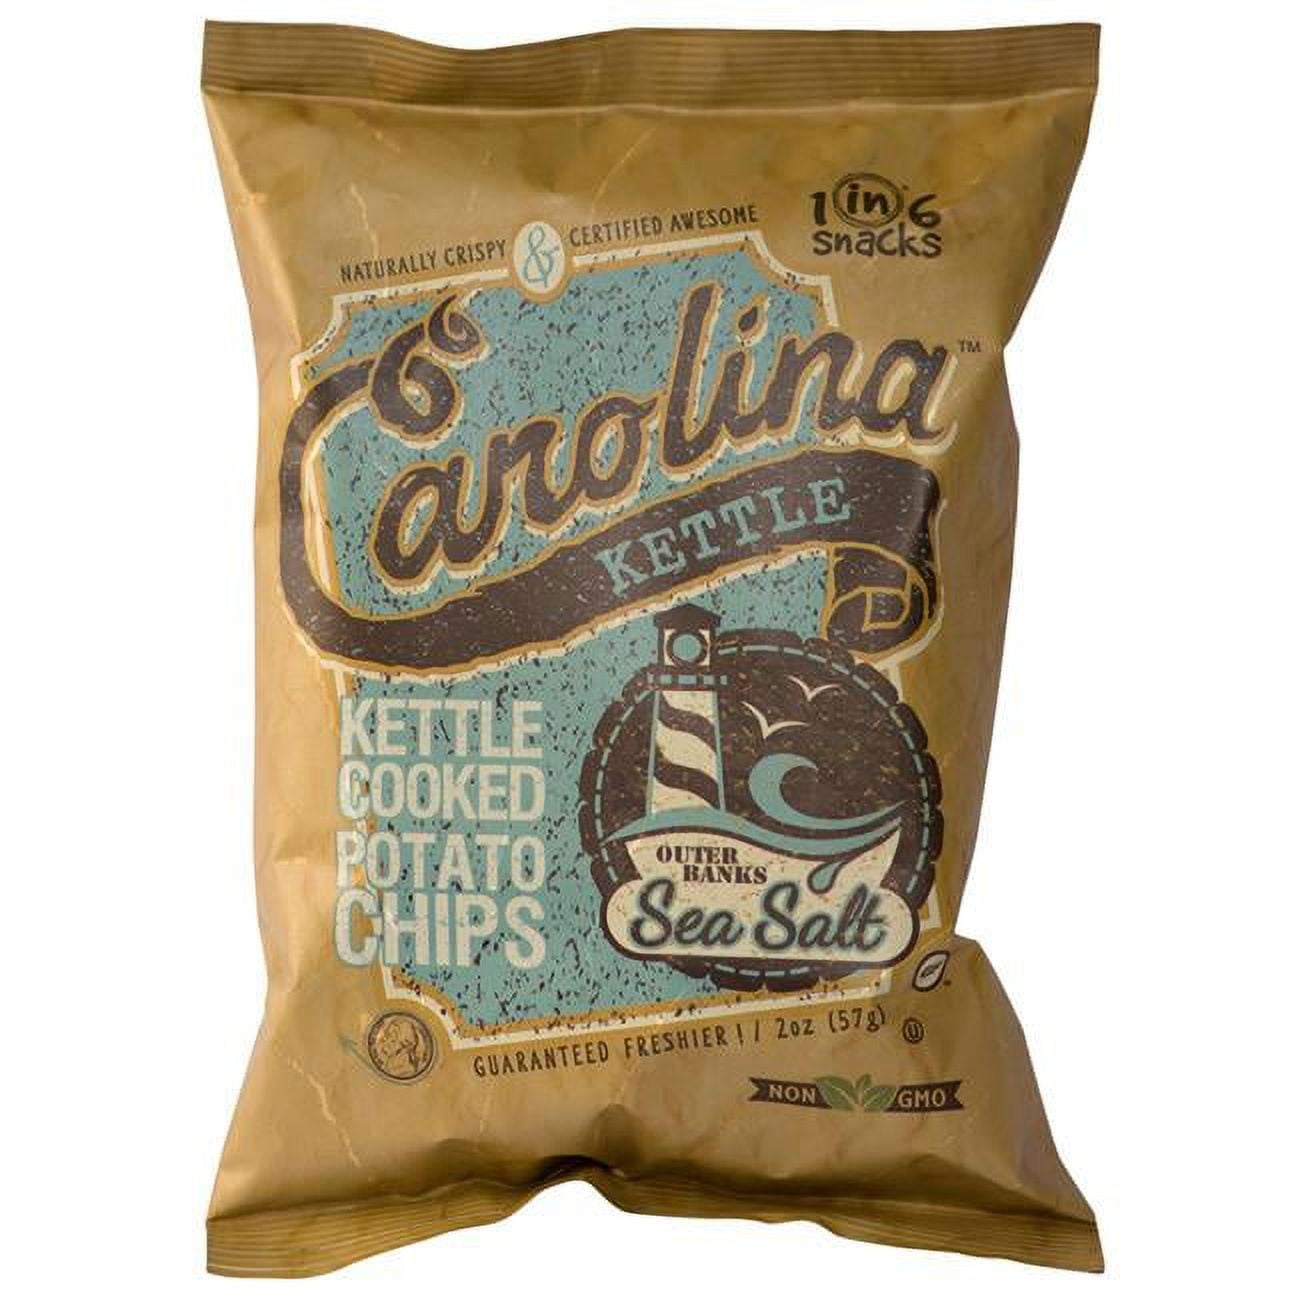 Picture of 1 in 6 Snacks 9023902 2 oz Bagged Carolina Outer Banks Sea Salt Potato Chips - Case of 20